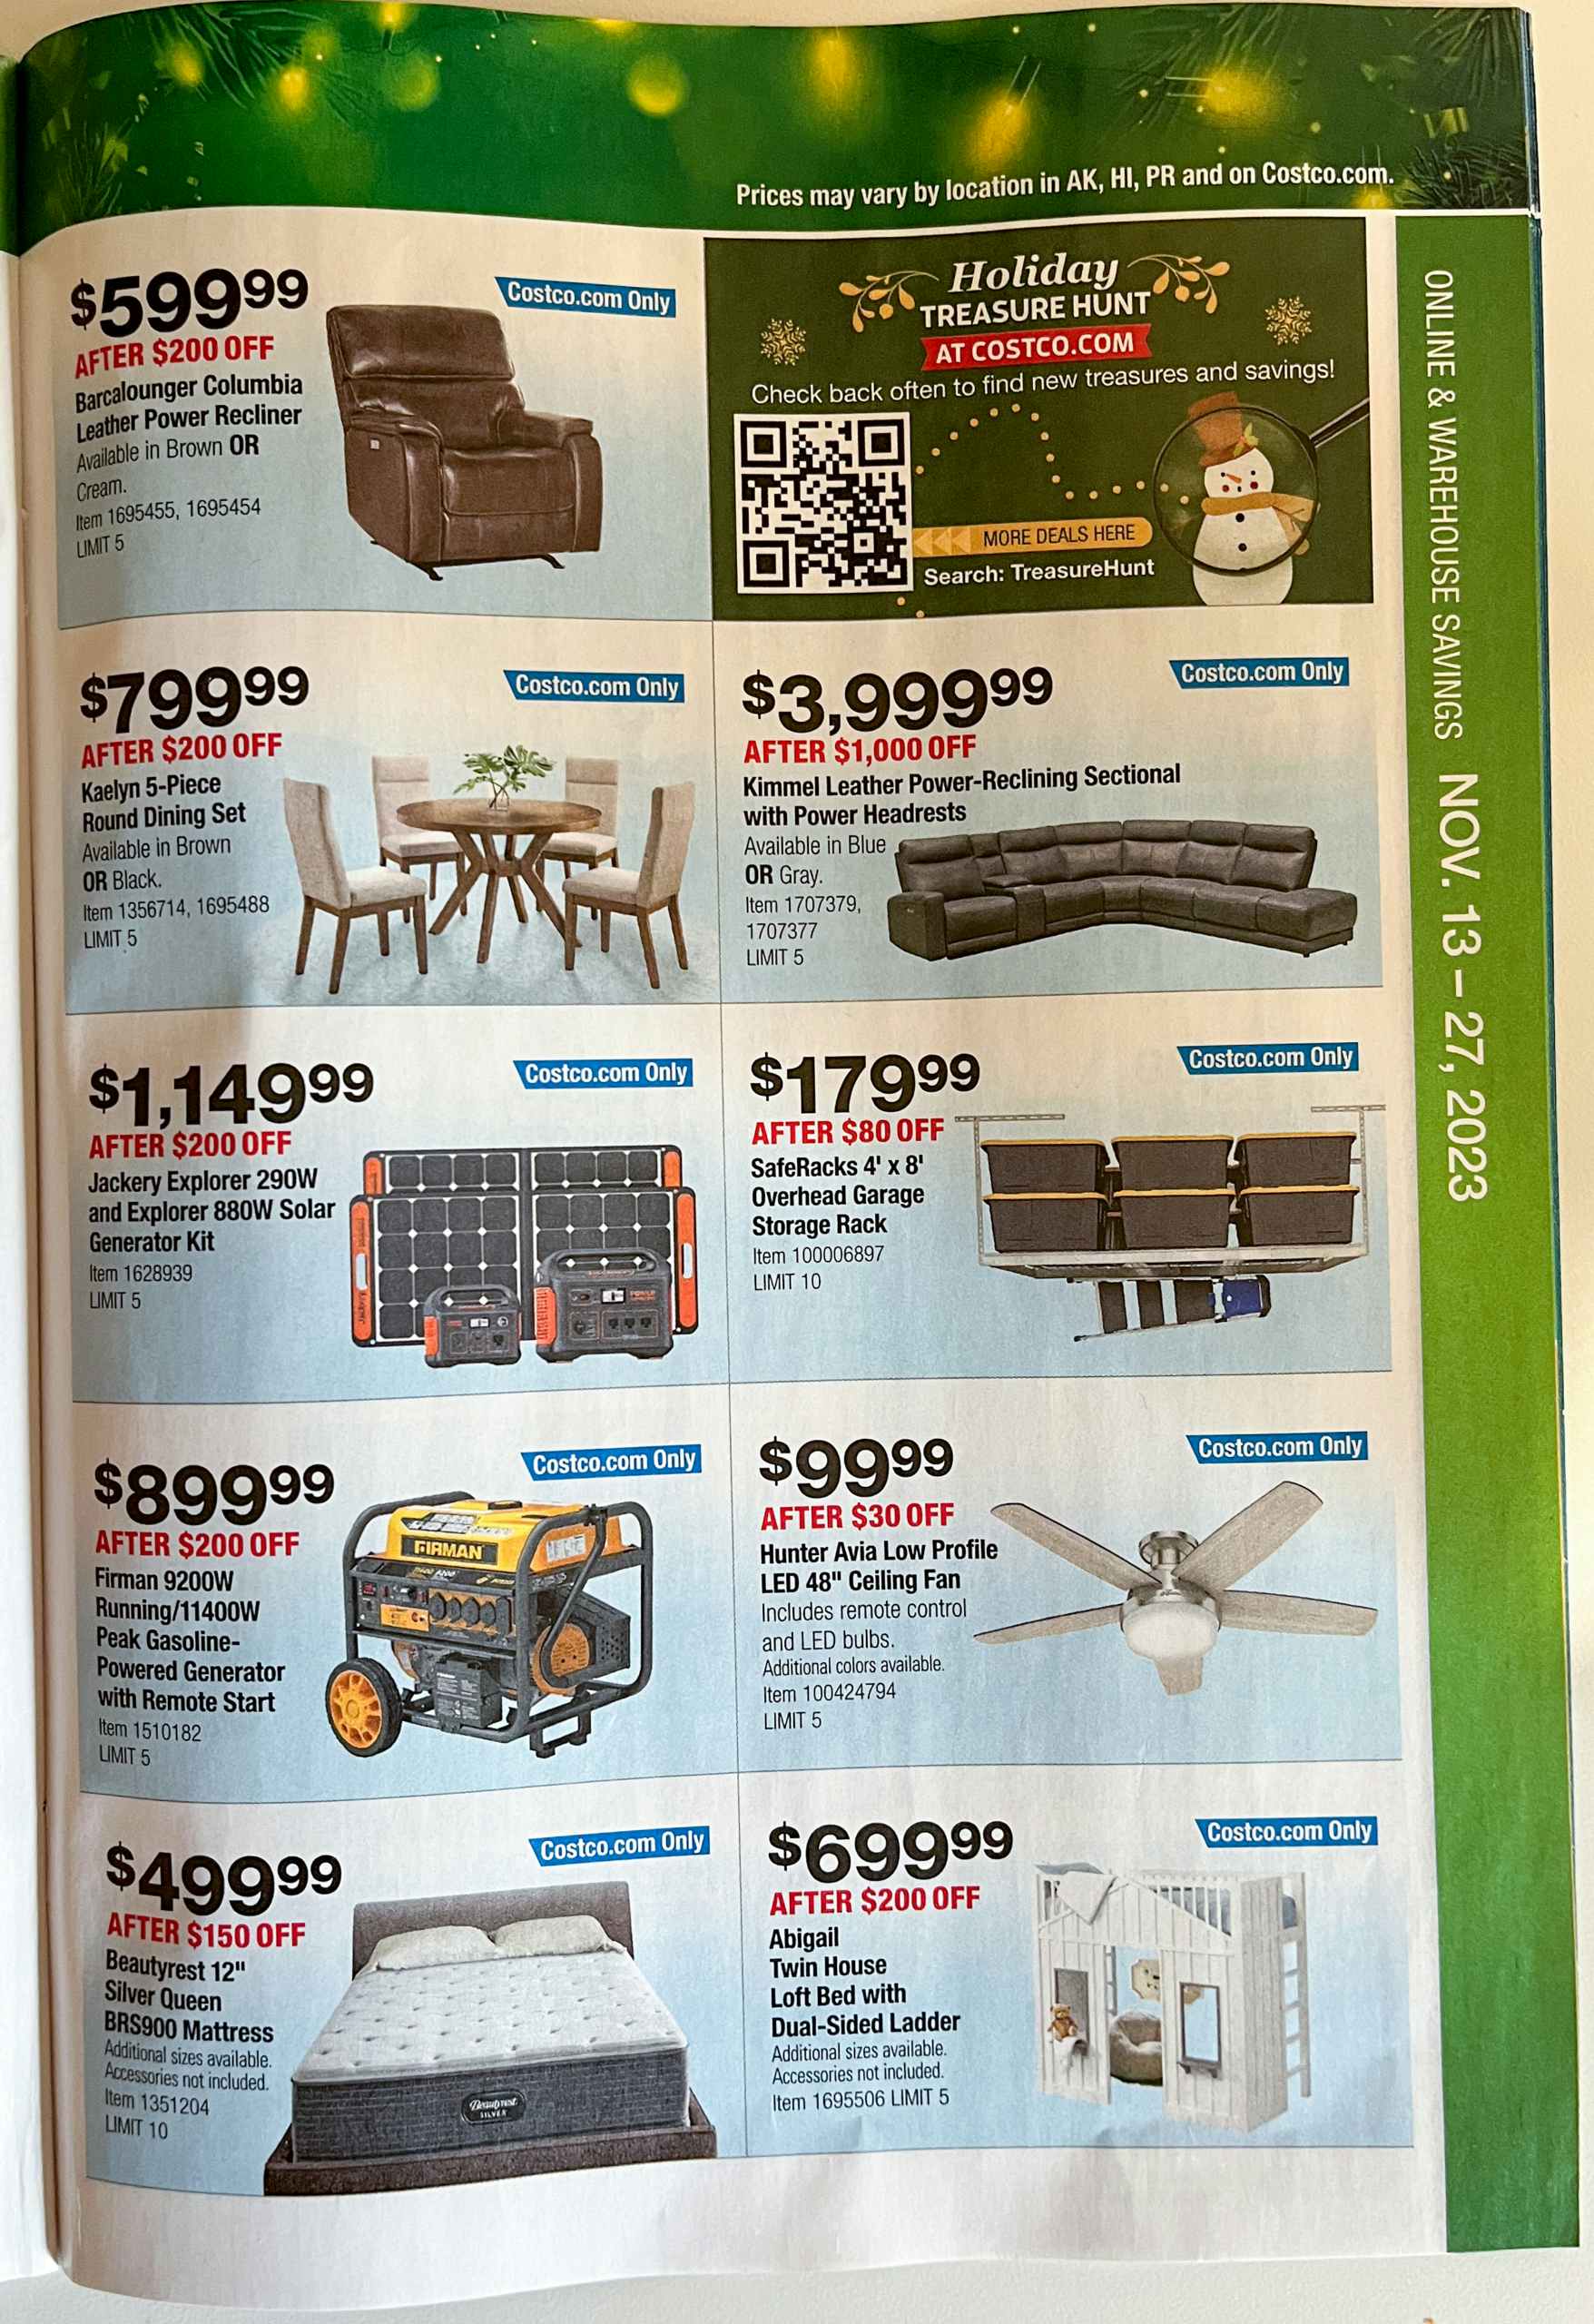 5 Super Clearance Deals Online at Costco Now